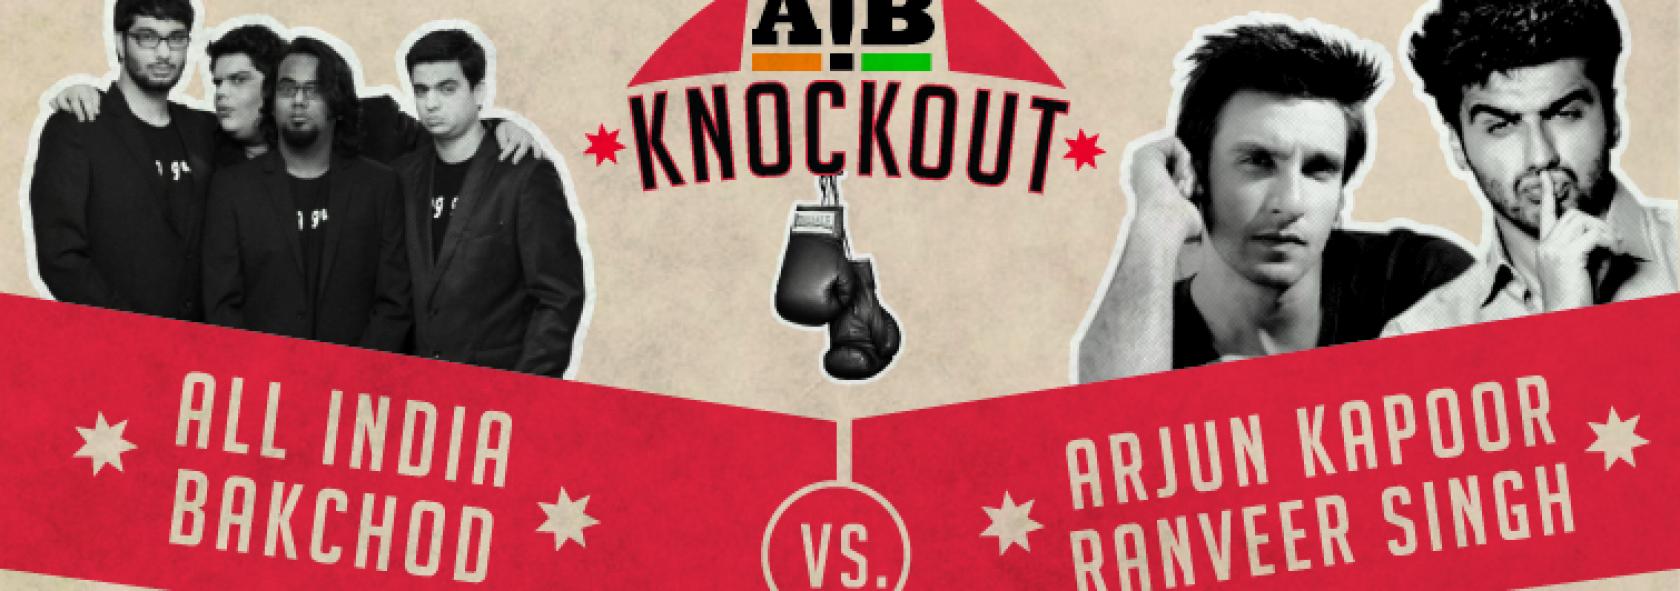 How far is it just and right to take action against AIB Knockout? RVCJ Media